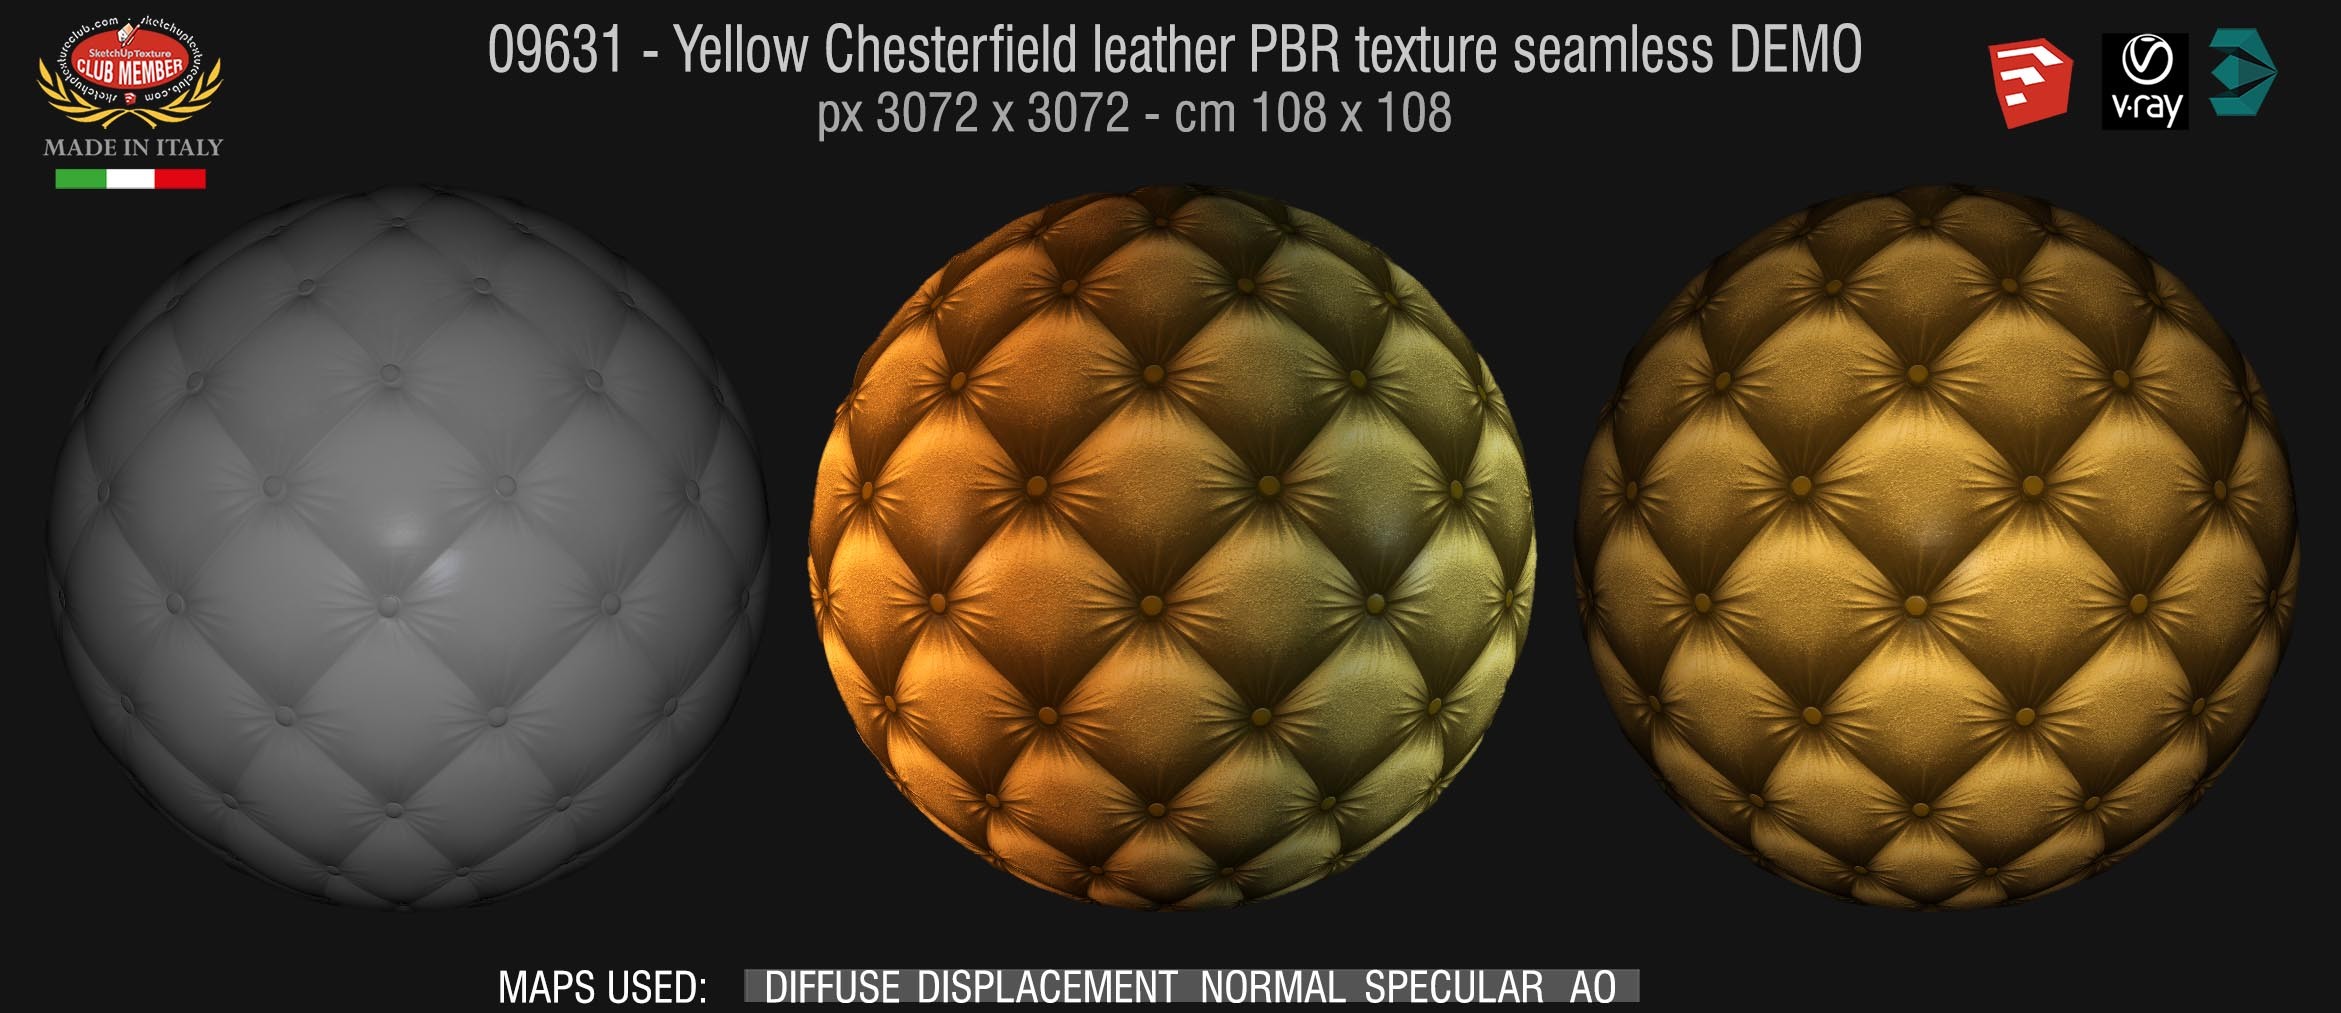 09631 Yellow Chesterfield leather PBR texture seamless DEMO